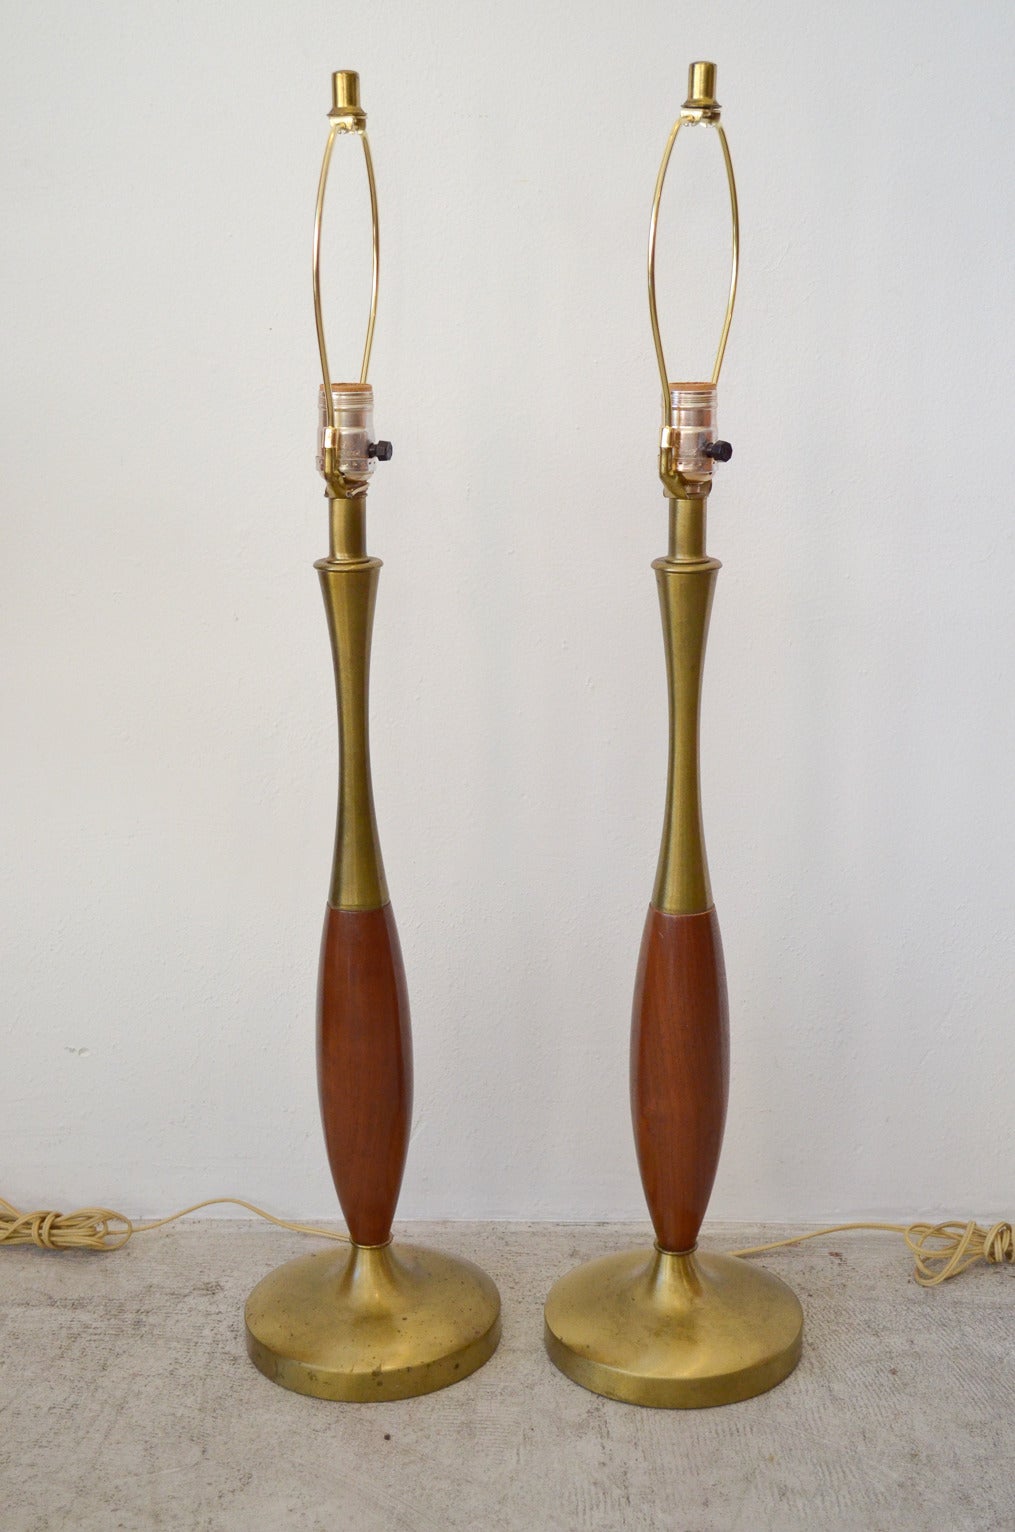 Matching pair of Patinated Brass and Walnut Tapered Lamps by Navis and Smith, Chicago, IL.  Original wiring, perfect working condition, still retain manufacturers label on the base.

Shades NOT INCLUDED, shown for scale.  Inquire if you would like